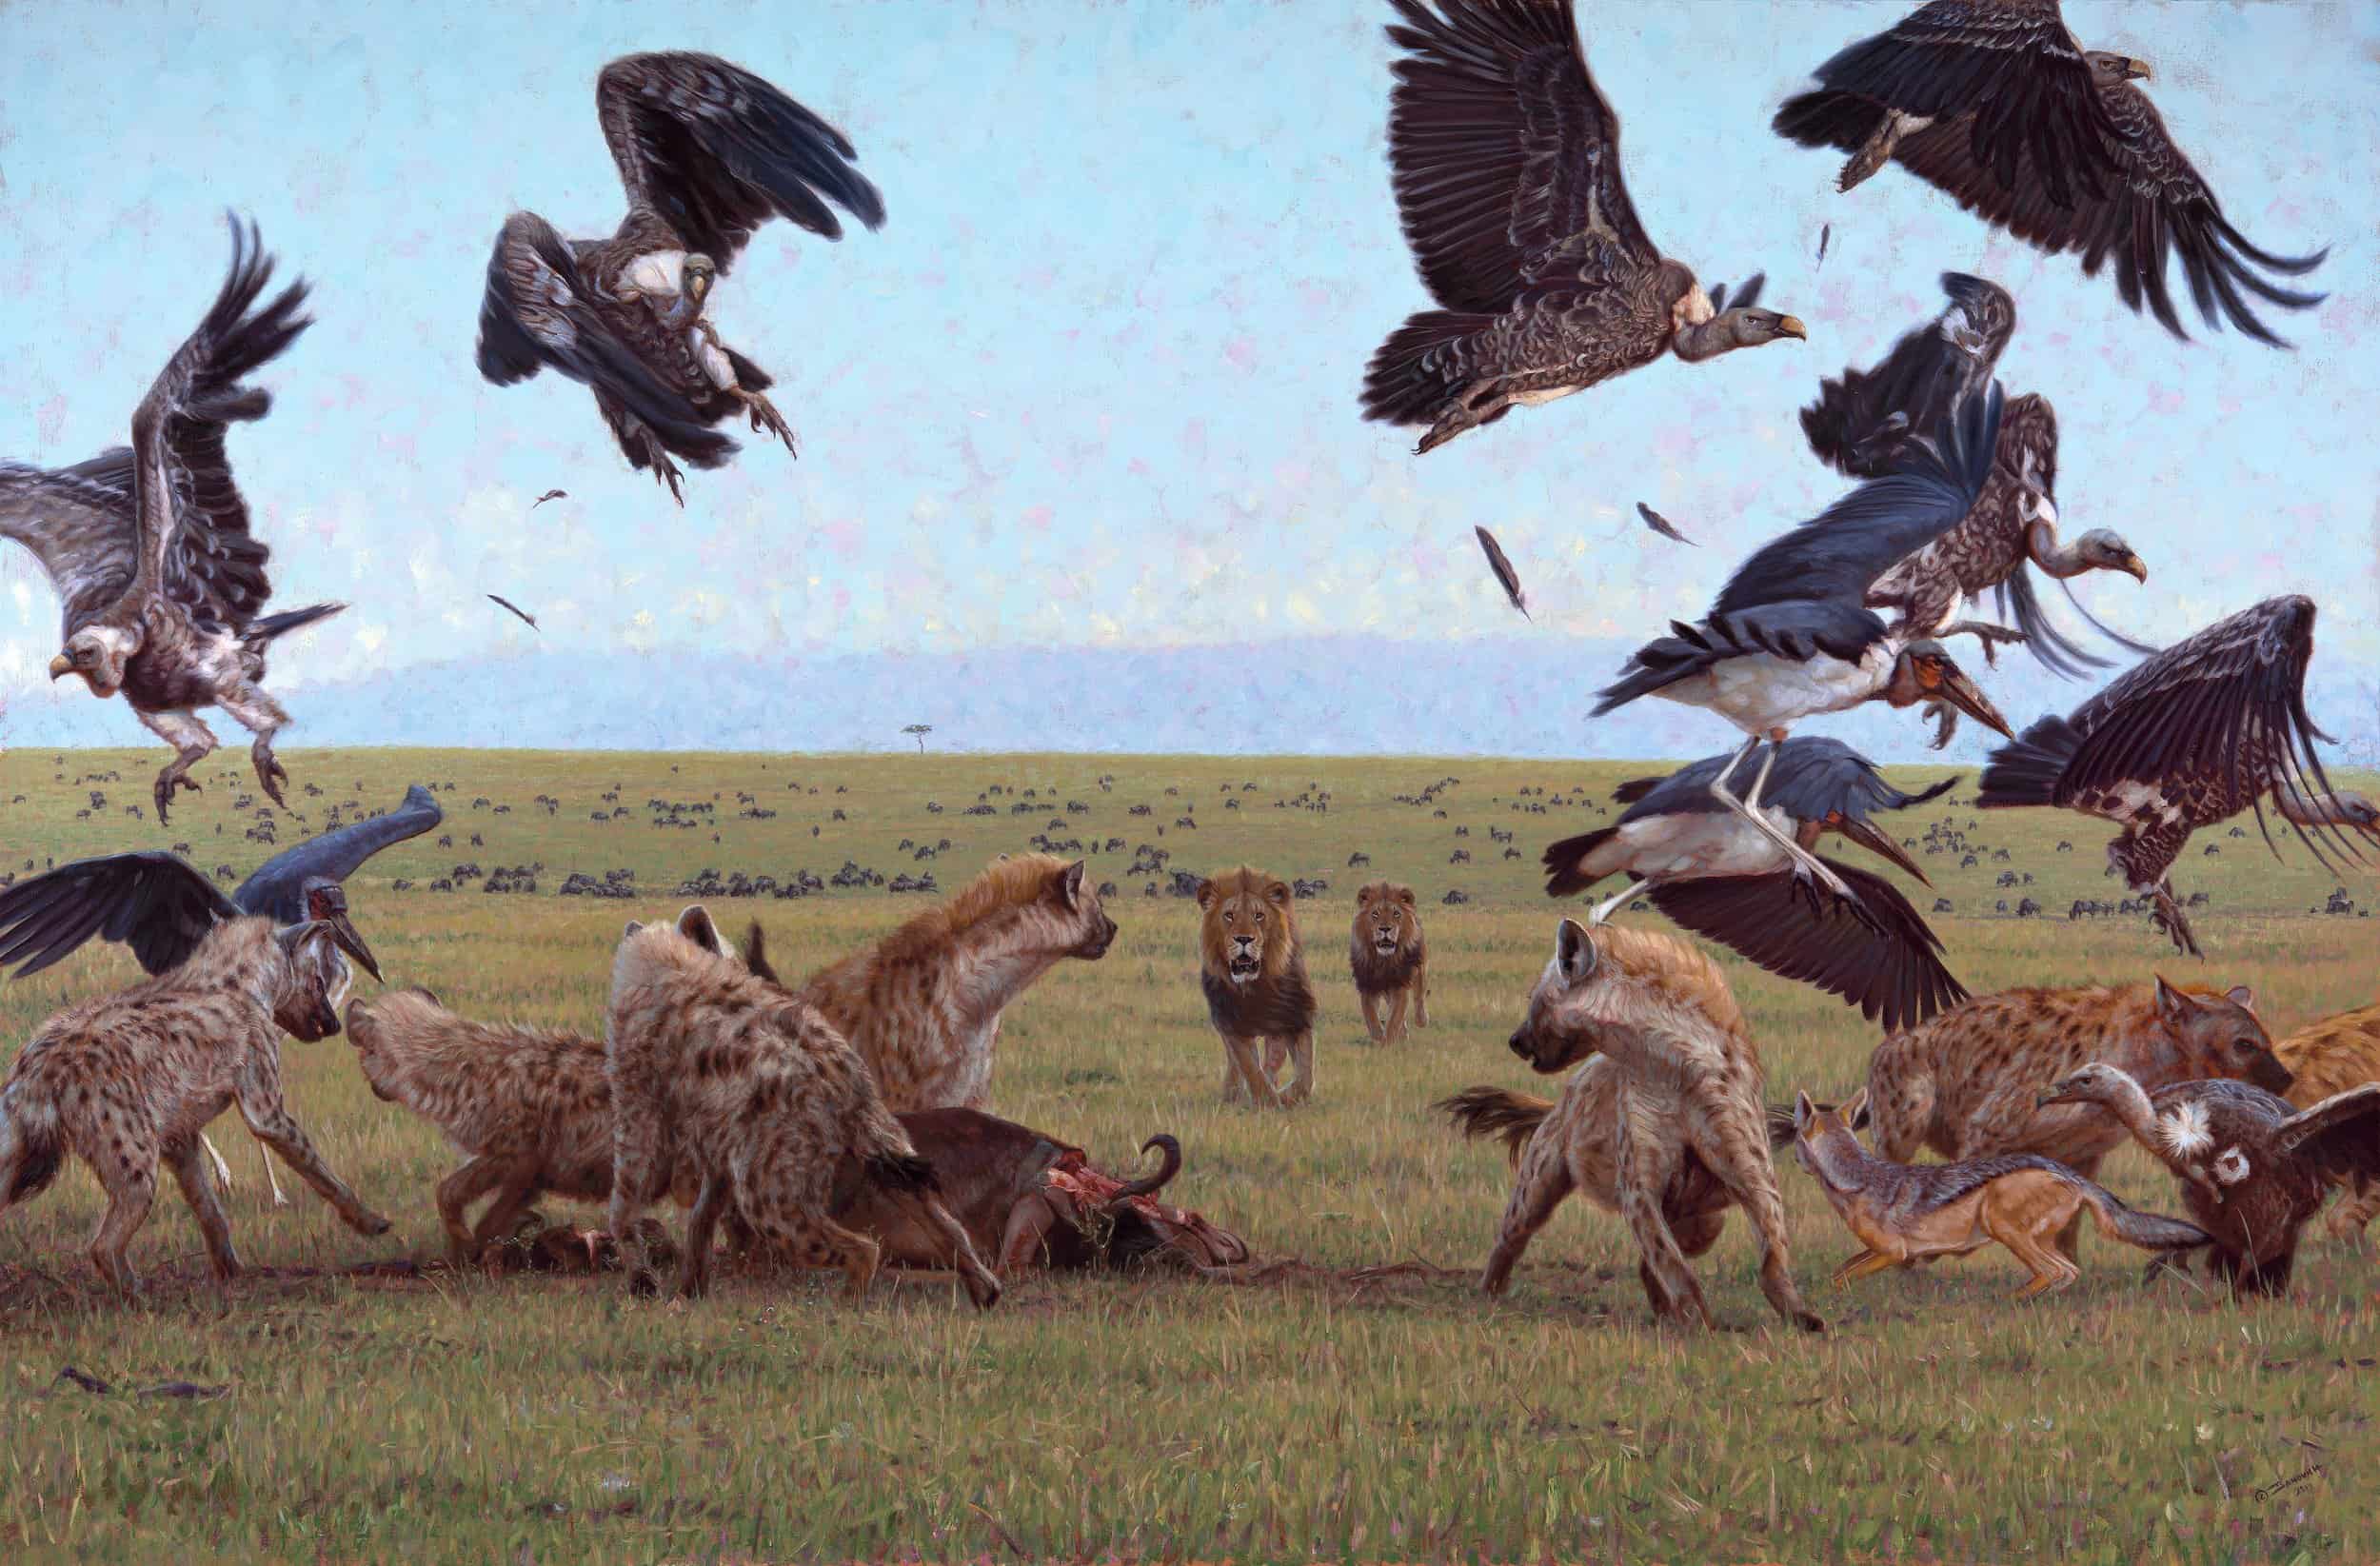 Painting by John Banovich of lions approaching a dead buffalo on the savannah while buzzards and hyenas scatter. 